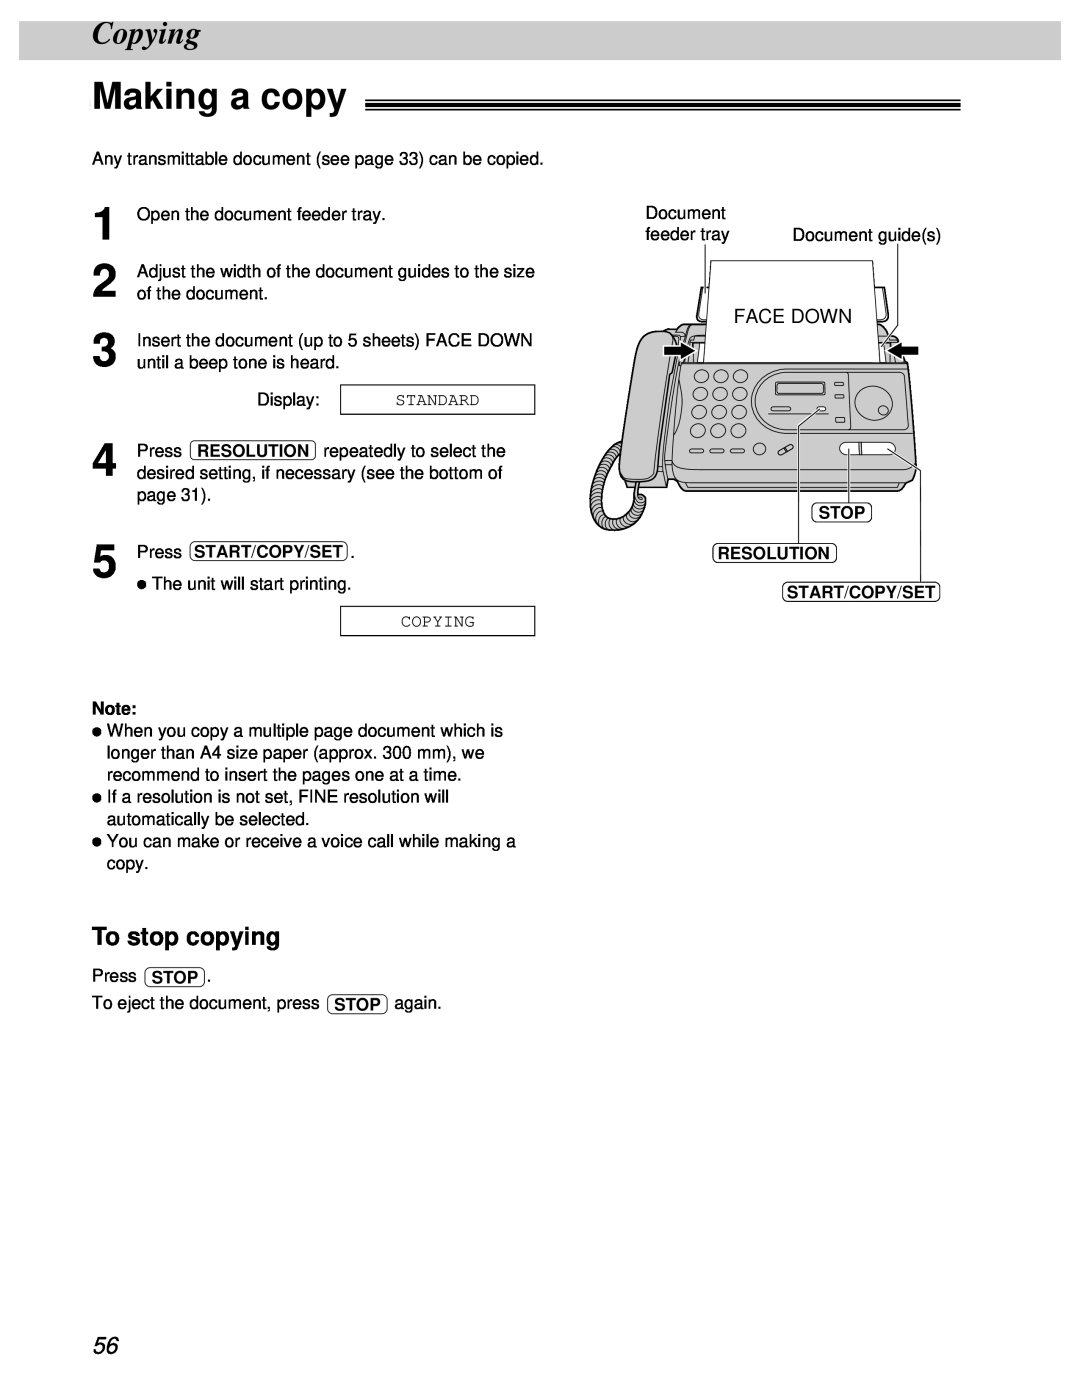 Panasonic KX-FT31BX quick start Making a copy, Copying, To stop copying 